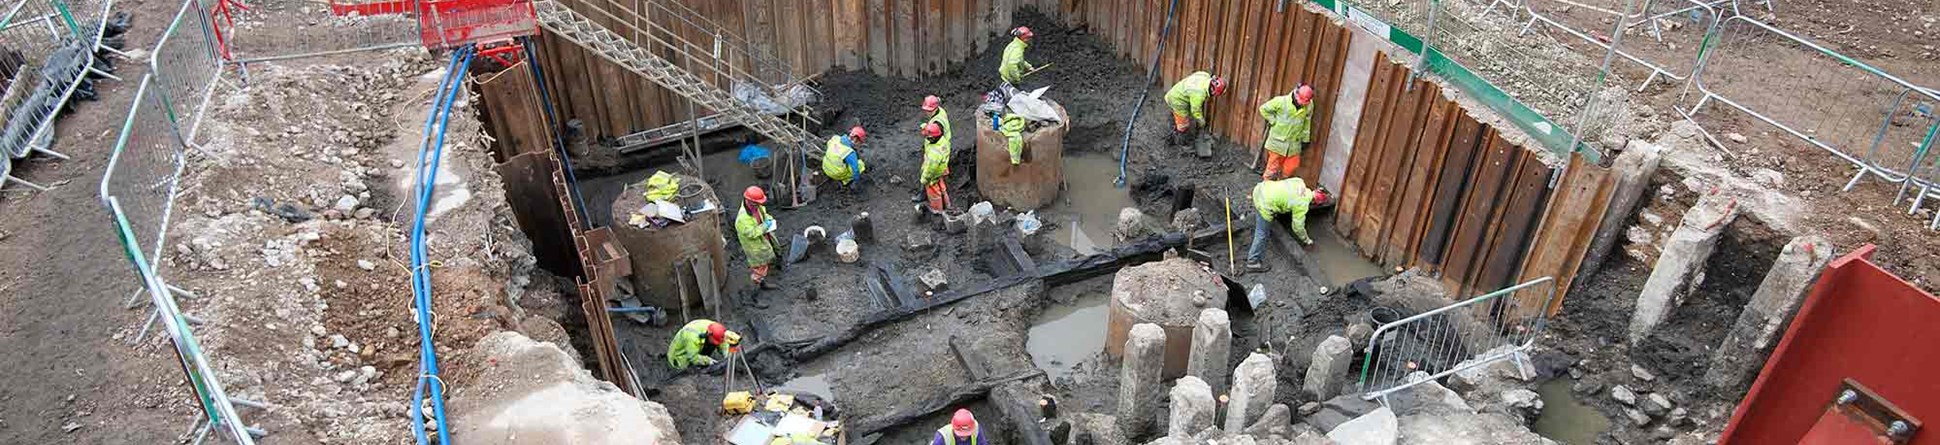 People working on an excavation site